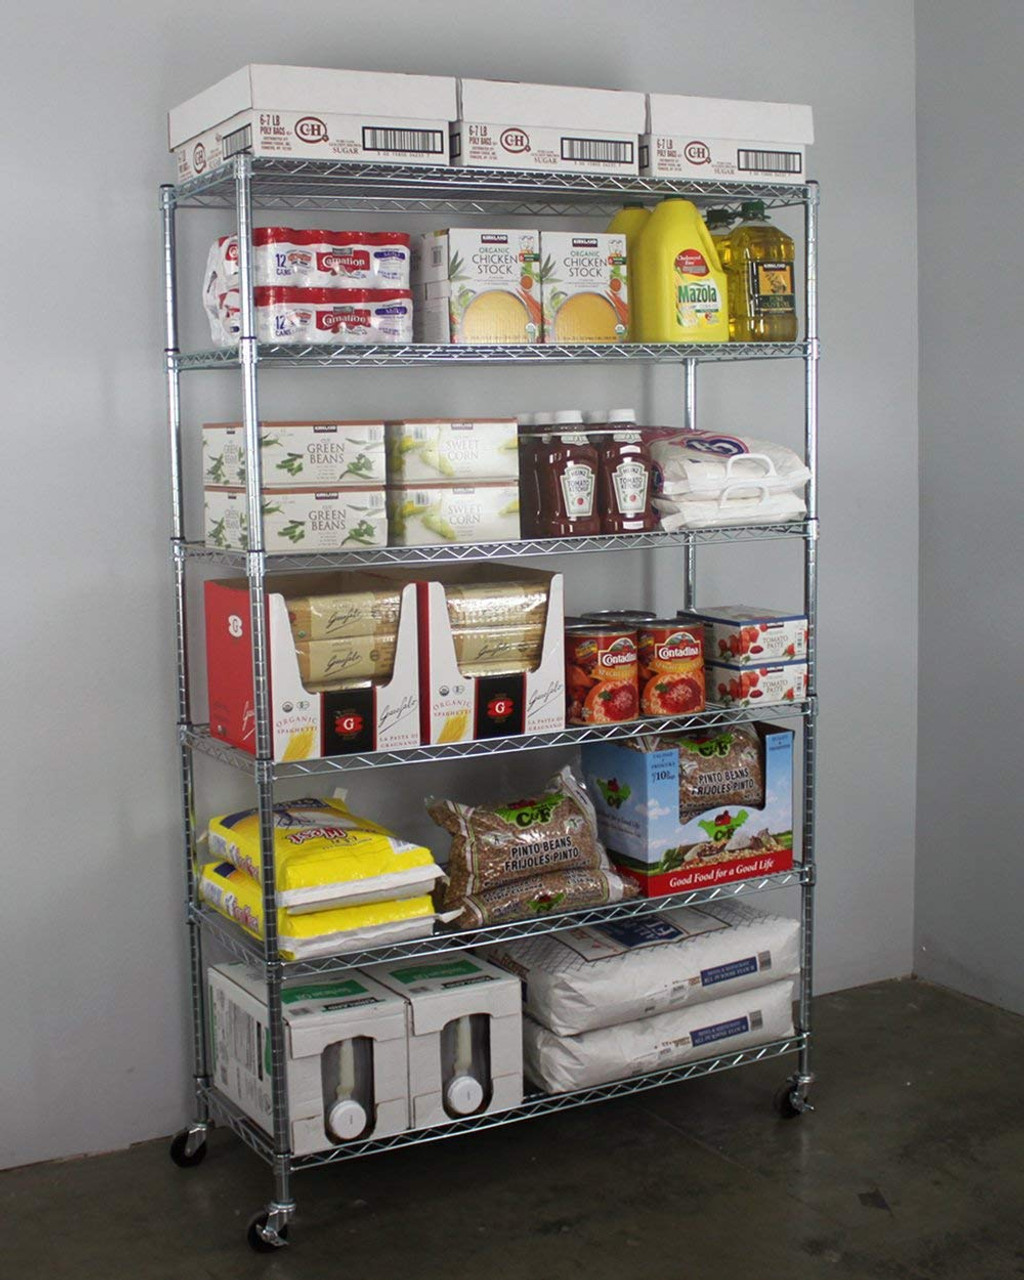 18″ x 48″ x 72″ 6-Tier Wire Shelving